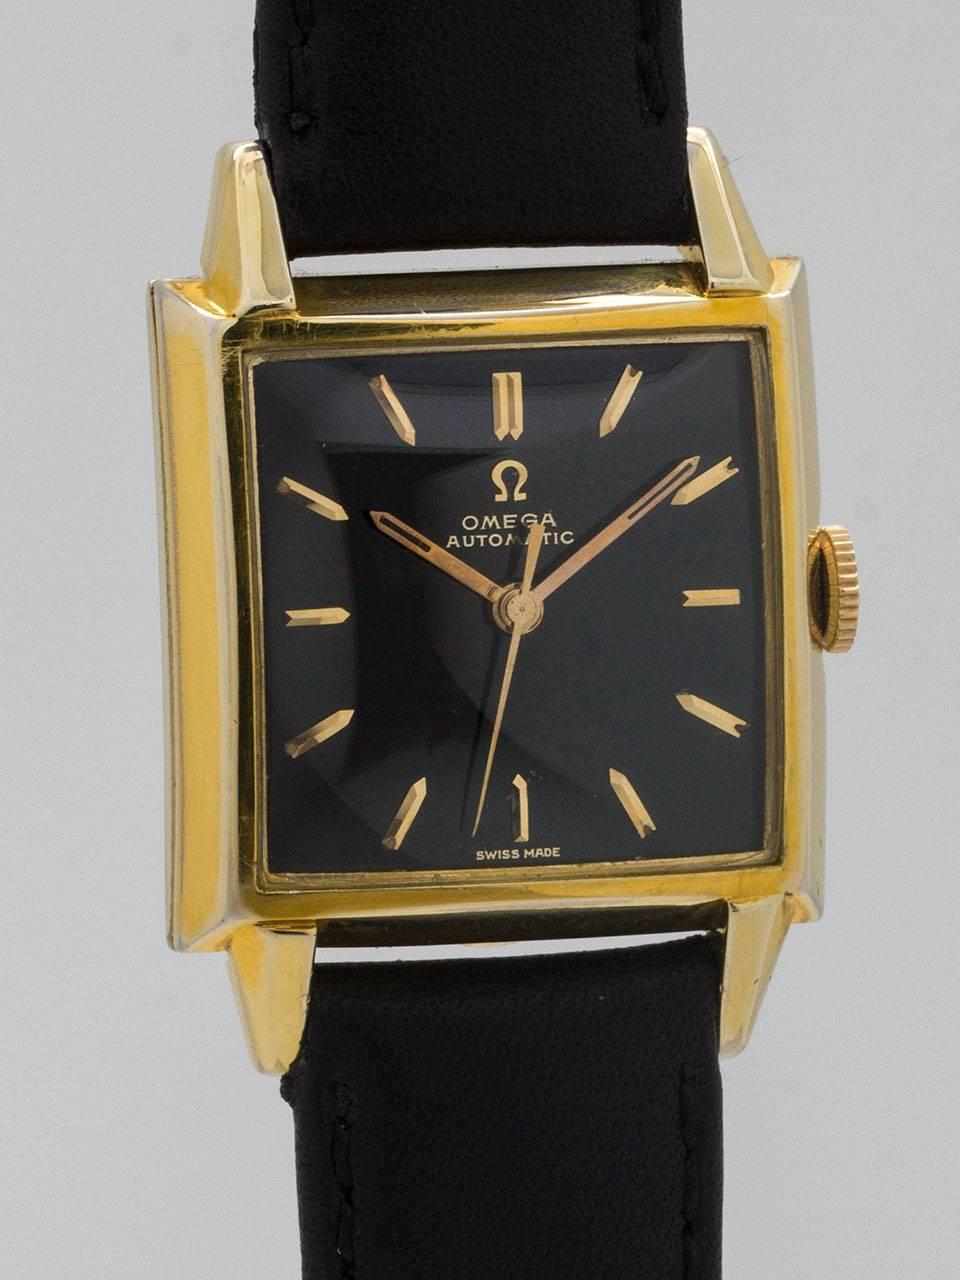 Omega Yellow Gold Filled Automatic Dress Wristwatch ref 6253 circa 1956.  with original gloss black gilt dial. Featuring 28 x 39mm square case with extended lugs and glass crystal. Original gloss black gilt dial with raised gold indexes and gilt